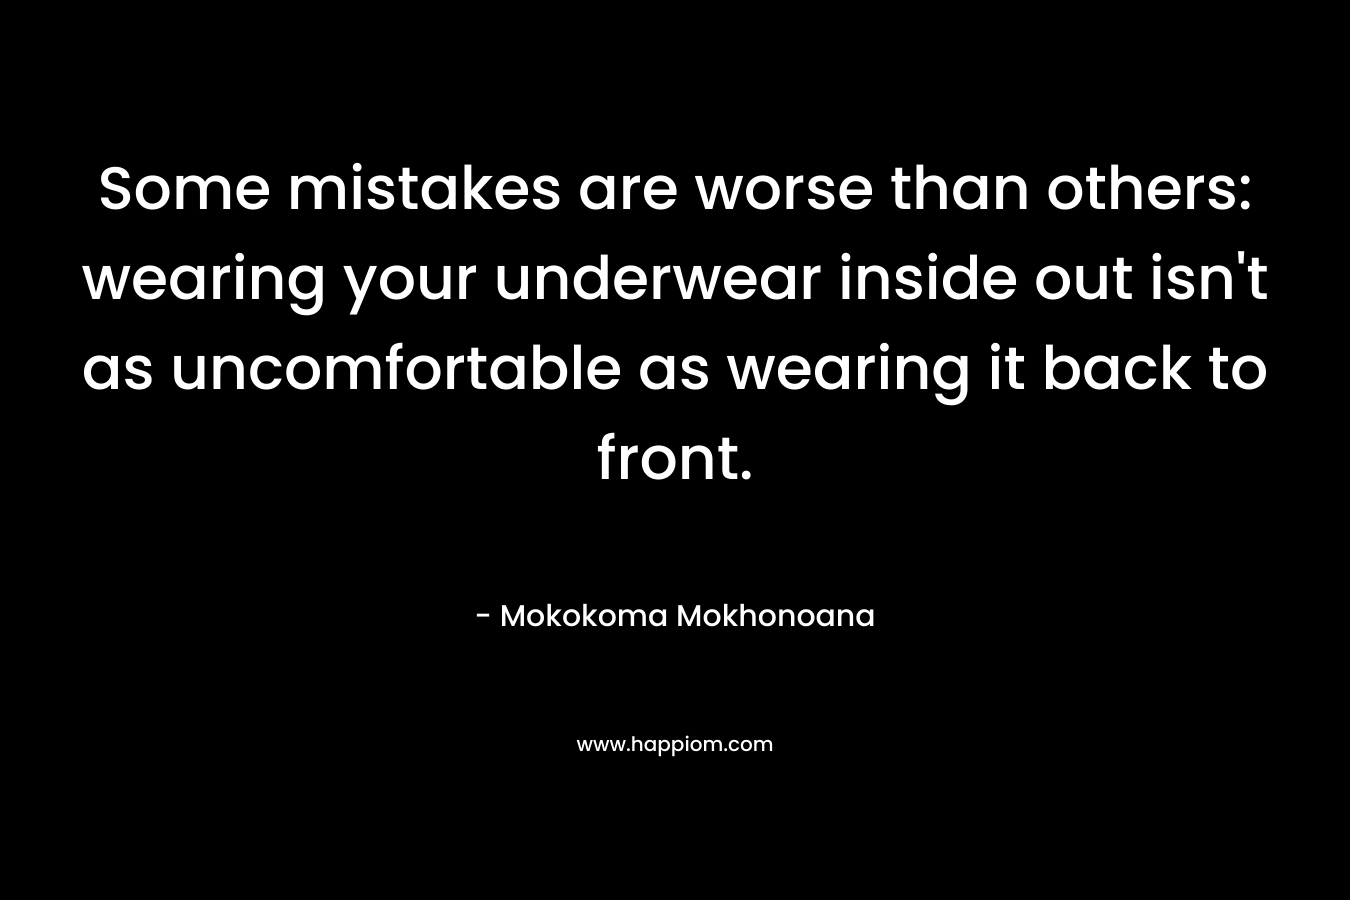 Some mistakes are worse than others: wearing your underwear inside out isn't as uncomfortable as wearing it back to front.